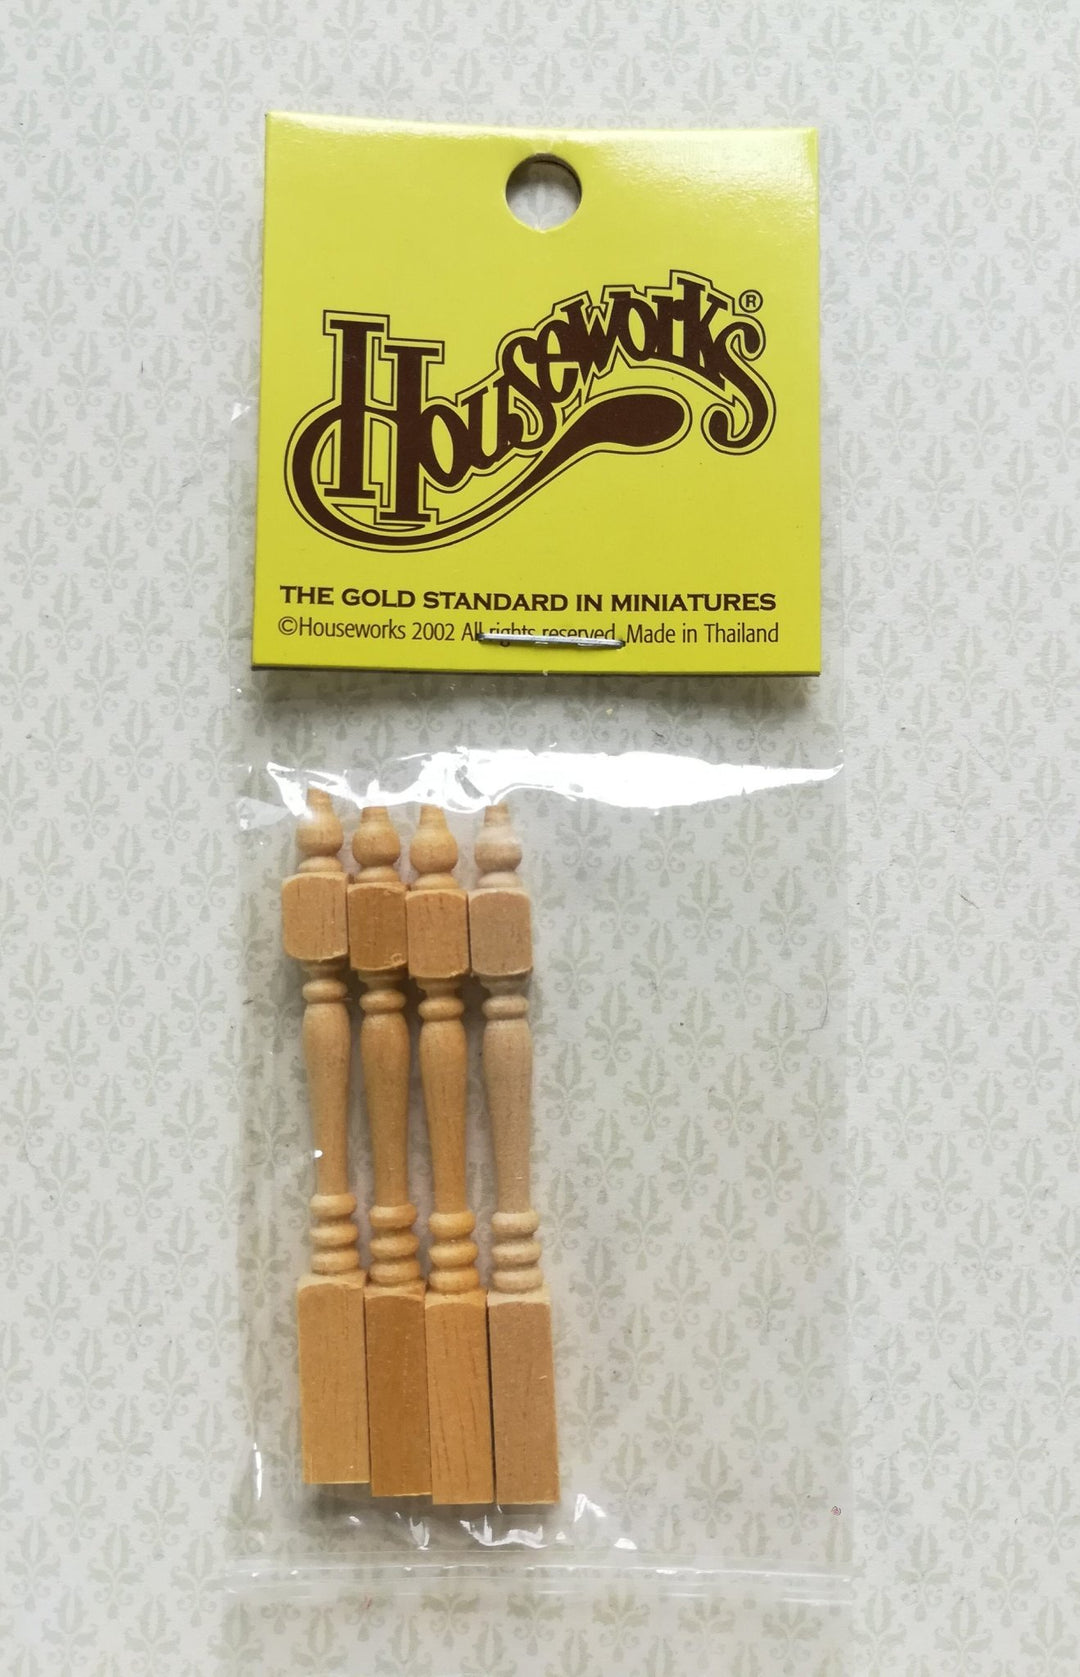 Dollhouse Miniature Spindles Table Legs Wood 4 Pieces 1:12 Scale 2 3/16" Long - Miniature Crush